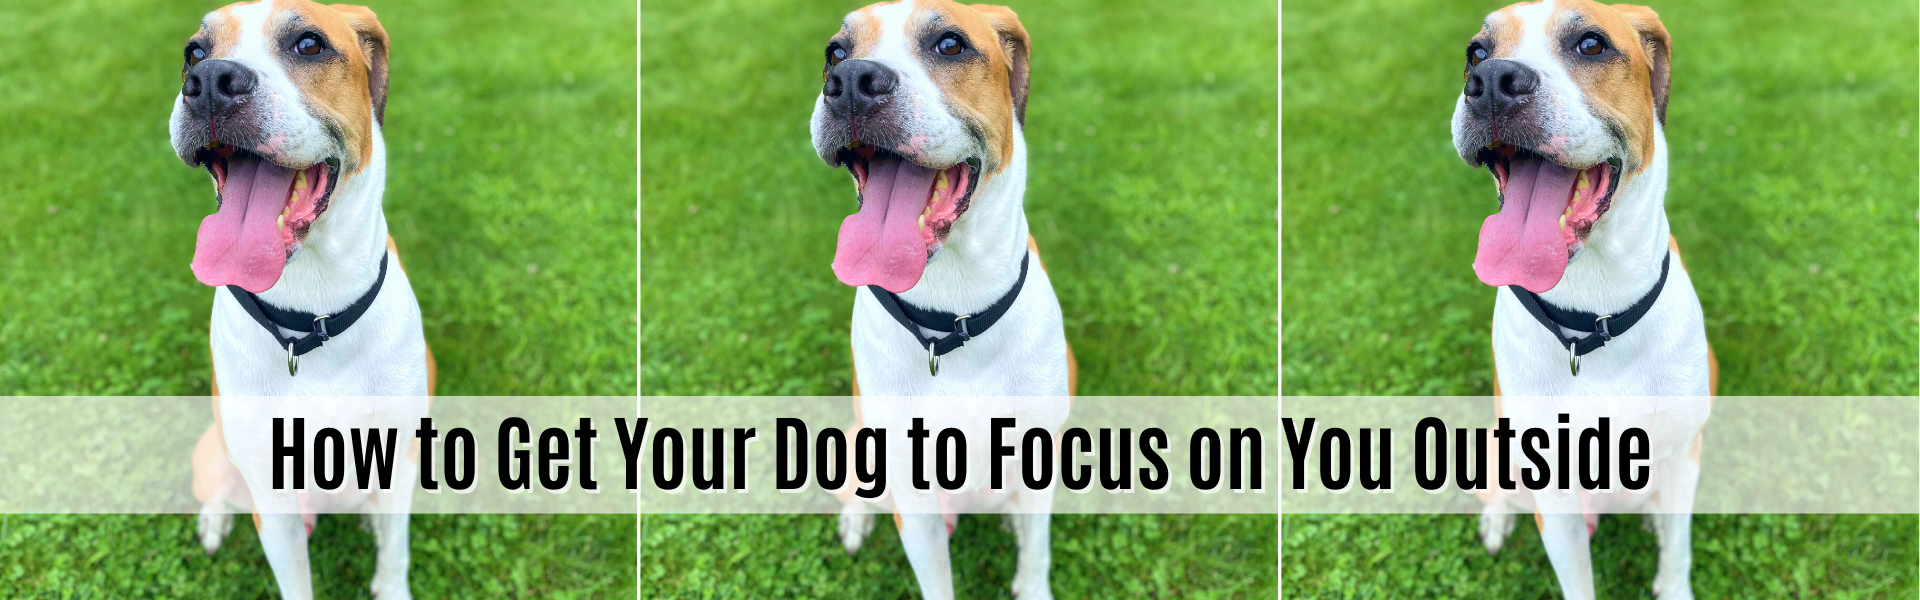 how to get your dog to focus on you outside